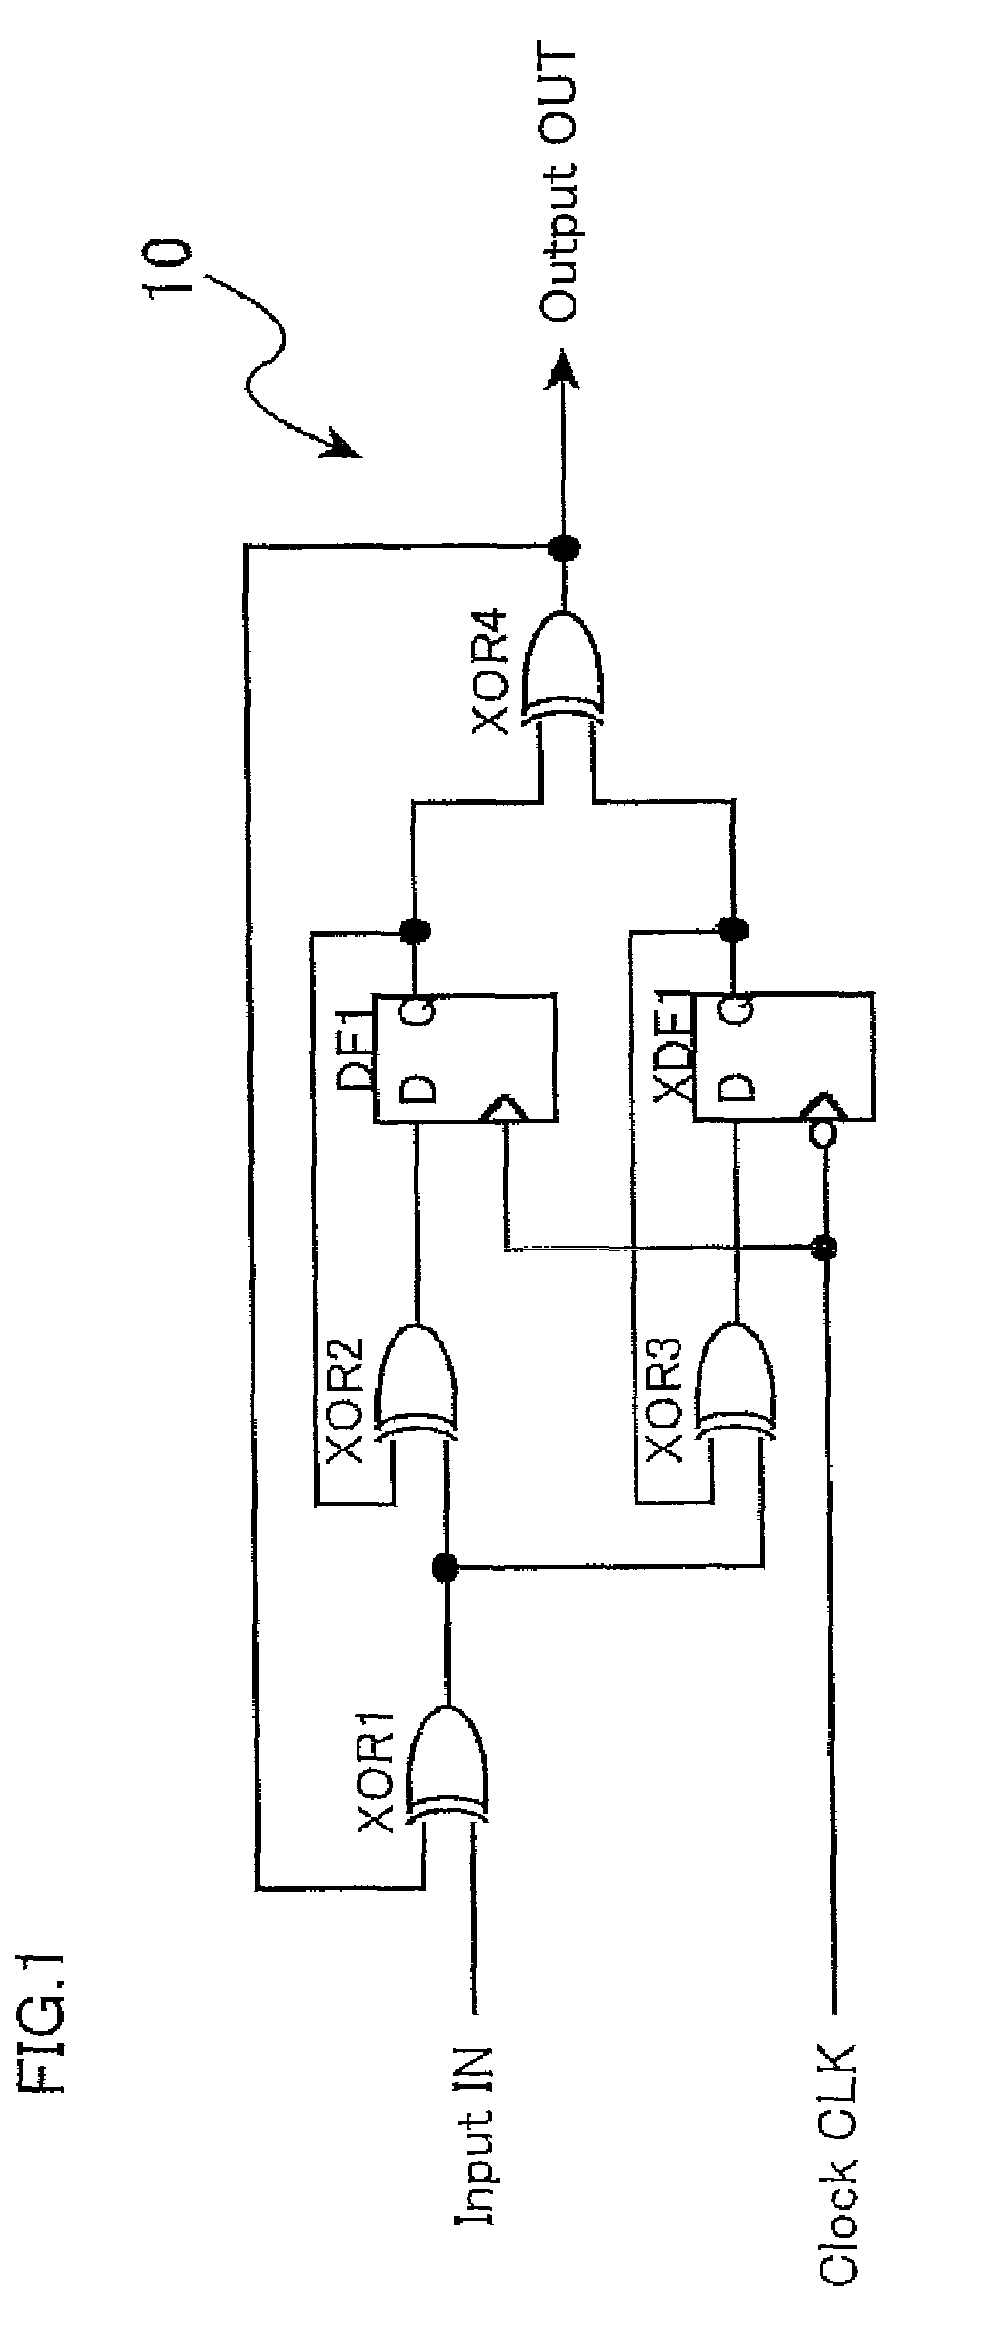 Data holding circuit and signal processing circuit